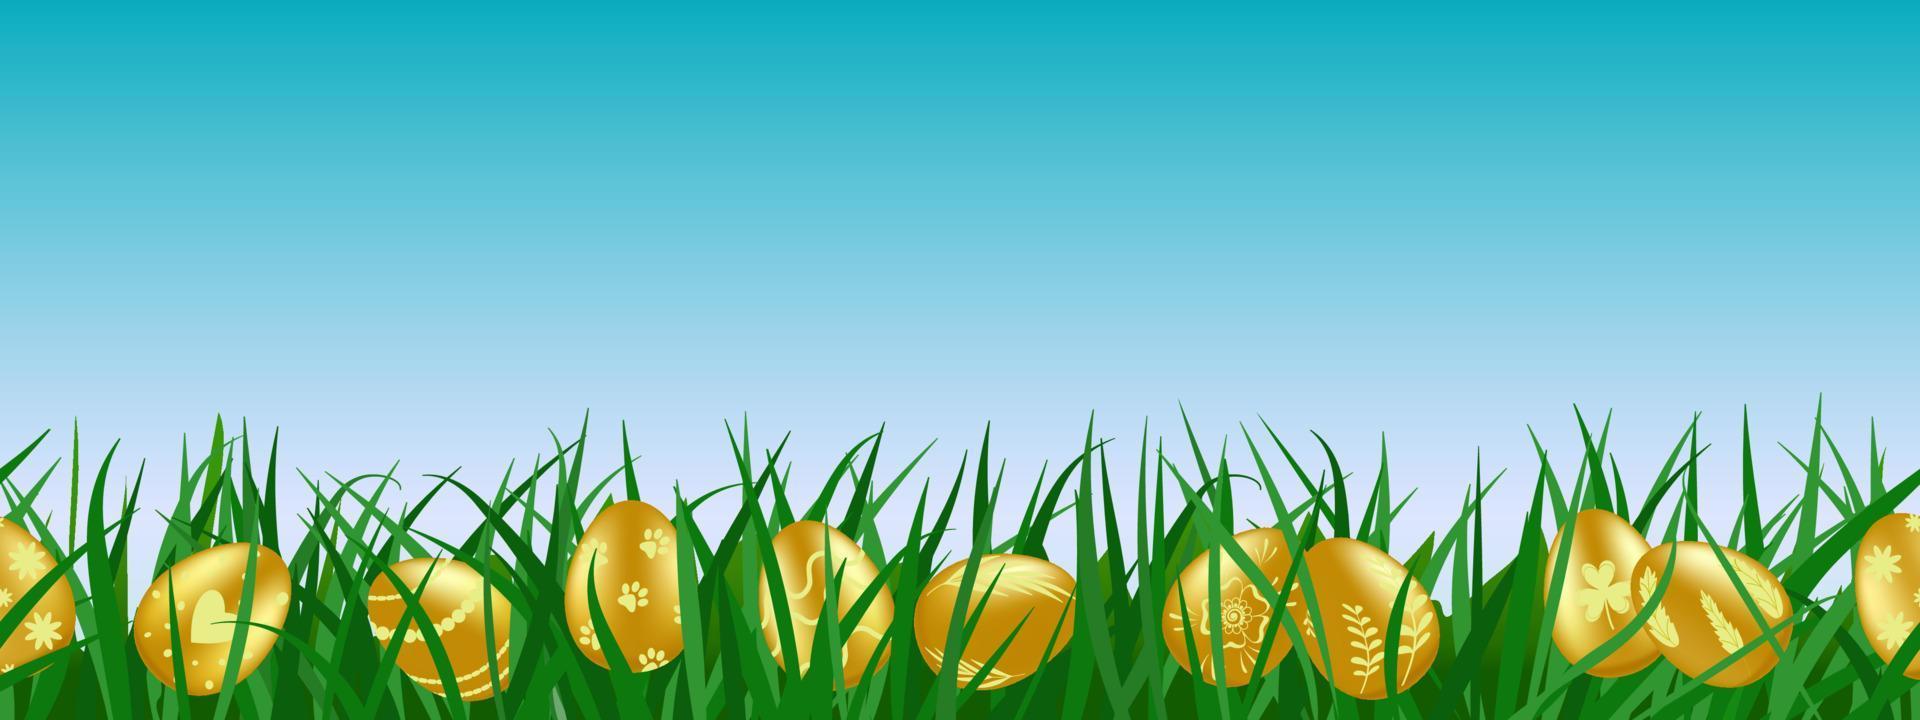 Cartoon golden Easter eggs decorated with patterns, hidden in green grass under beautiful blue sky. Lush green meadow on sunny spring day. Egg hunt seamless border background vector